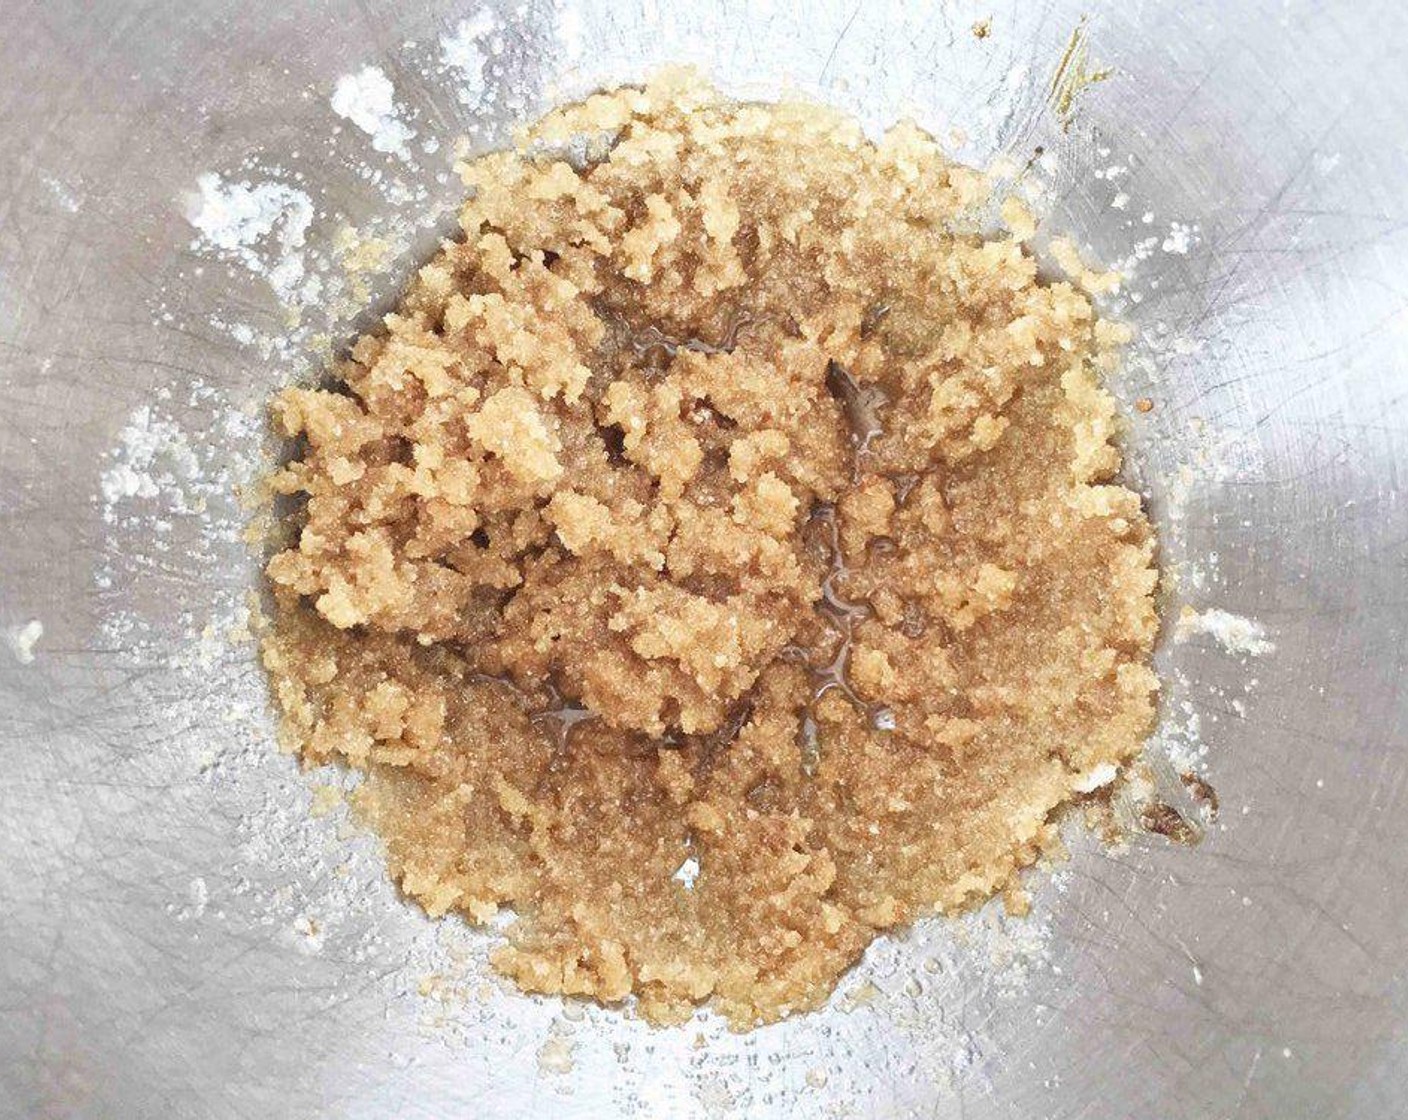 step 2 In the bowl of a stand mixer, add the Vegetable Oil (1/4 cup), Granulated Sugar (1 cup), Natural Sweetener (1 1/2 Tbsp) and Molasses (1 Tbsp). Beat together until well combined.